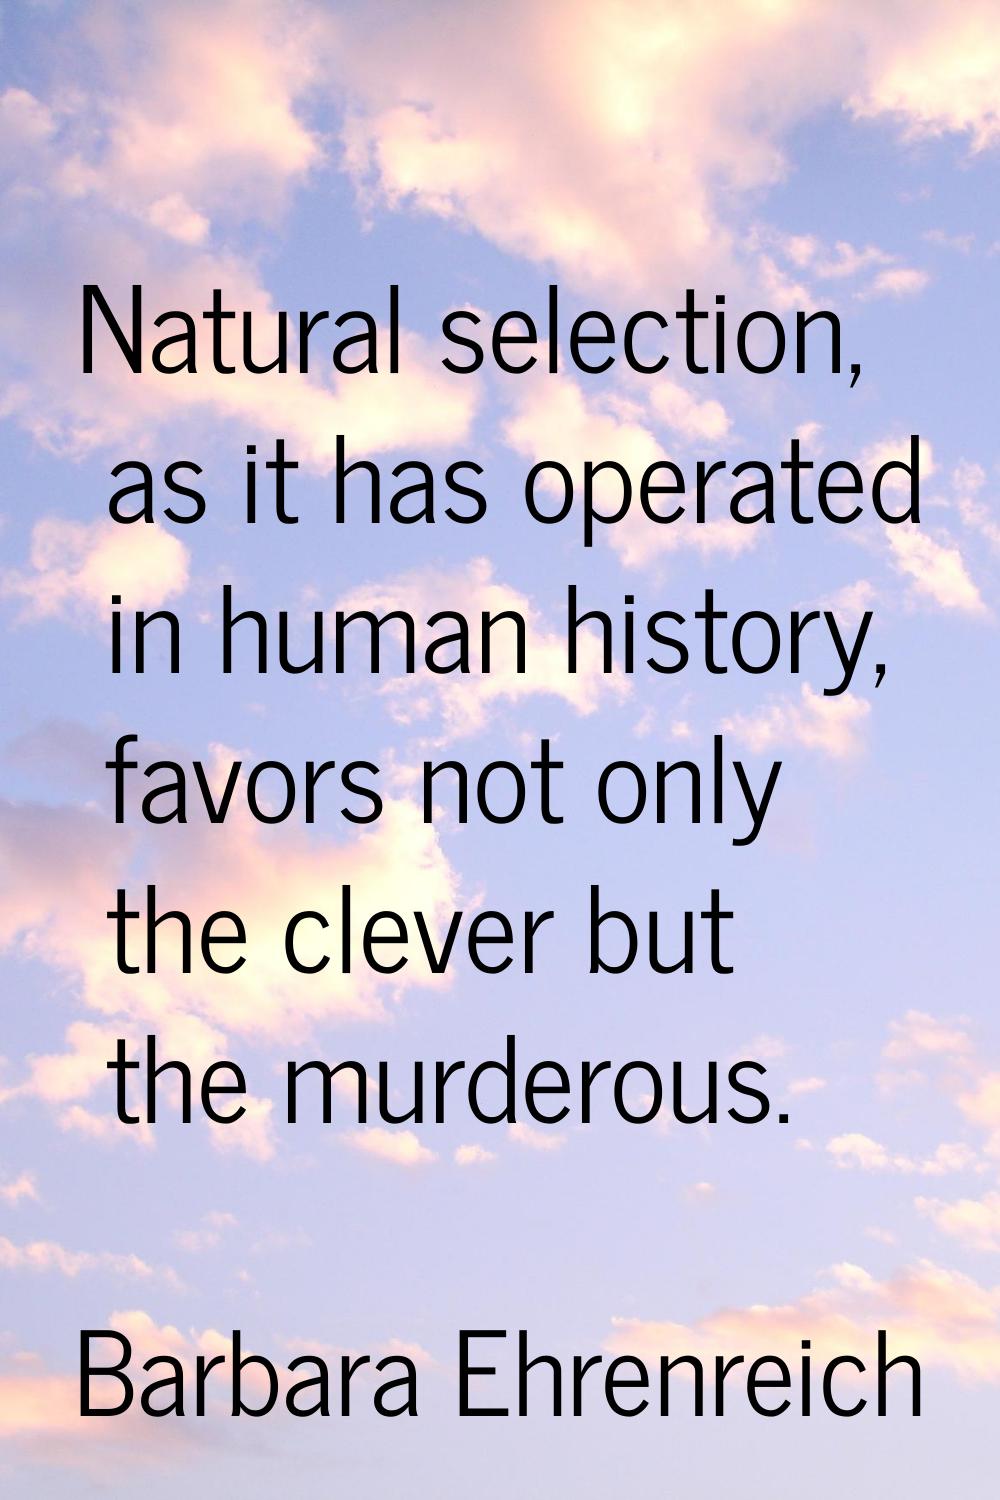 Natural selection, as it has operated in human history, favors not only the clever but the murderou